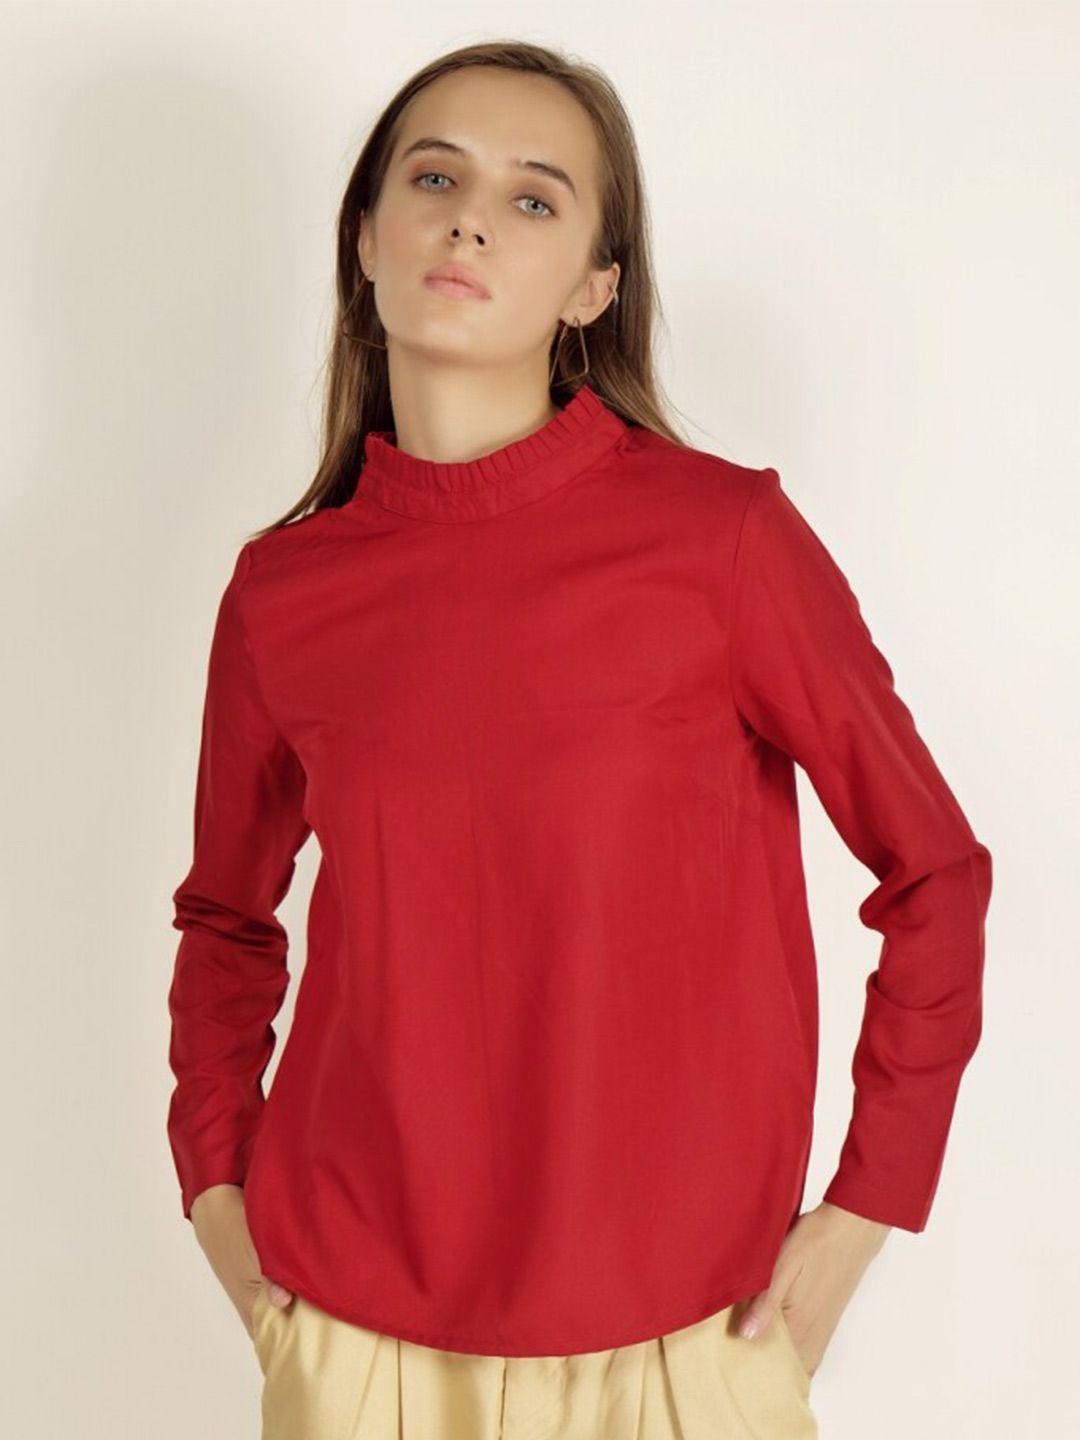 invictus high neck cuffed sleeves top